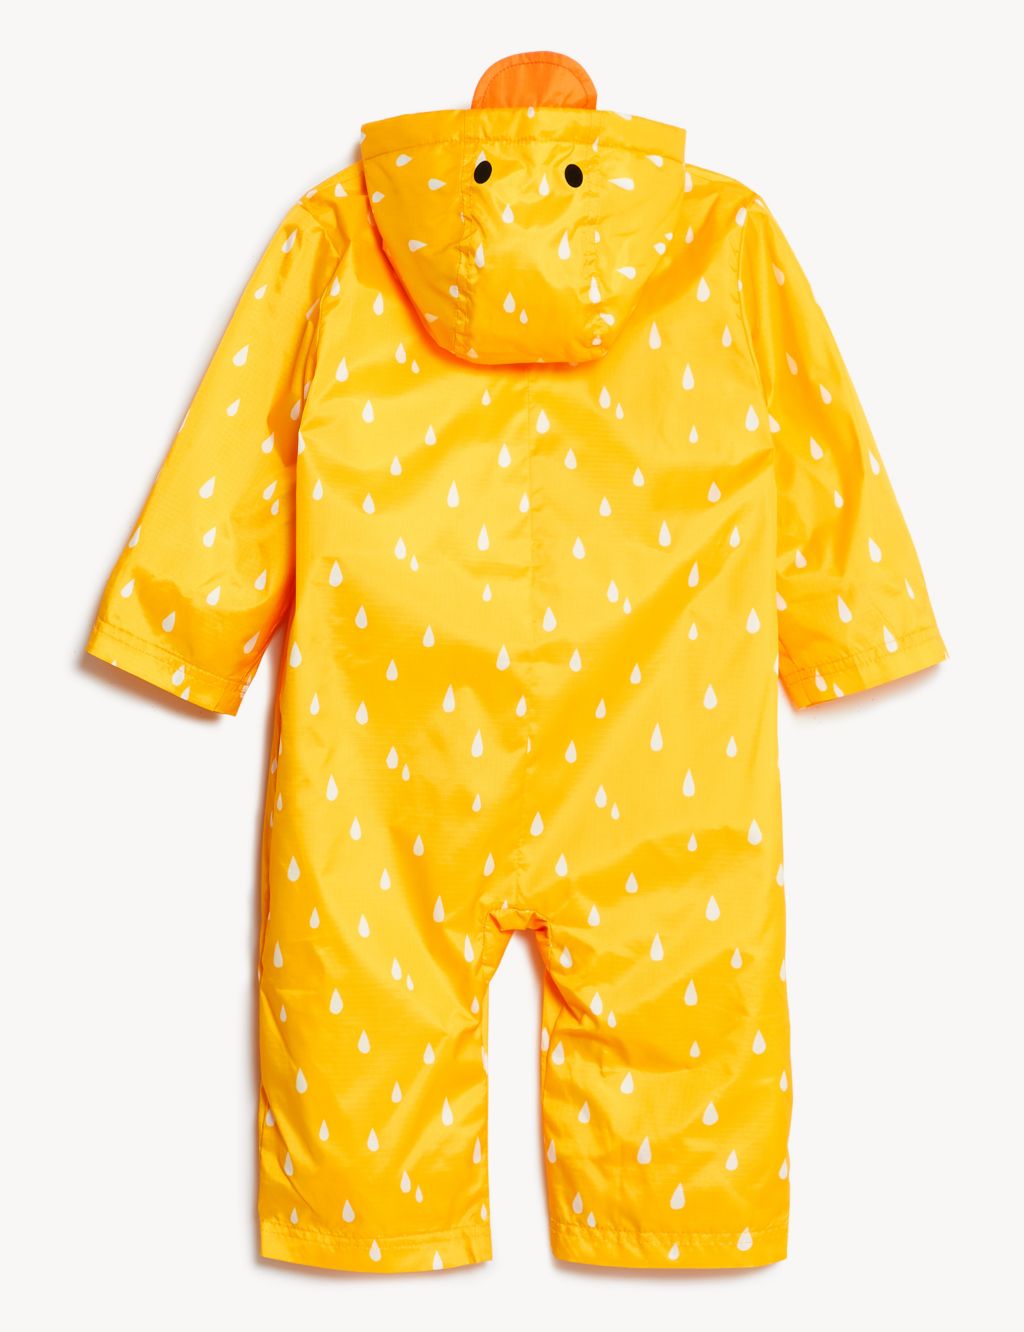 Stormwear™ Duck Puddle Suit (0-3 Yrs) image 3